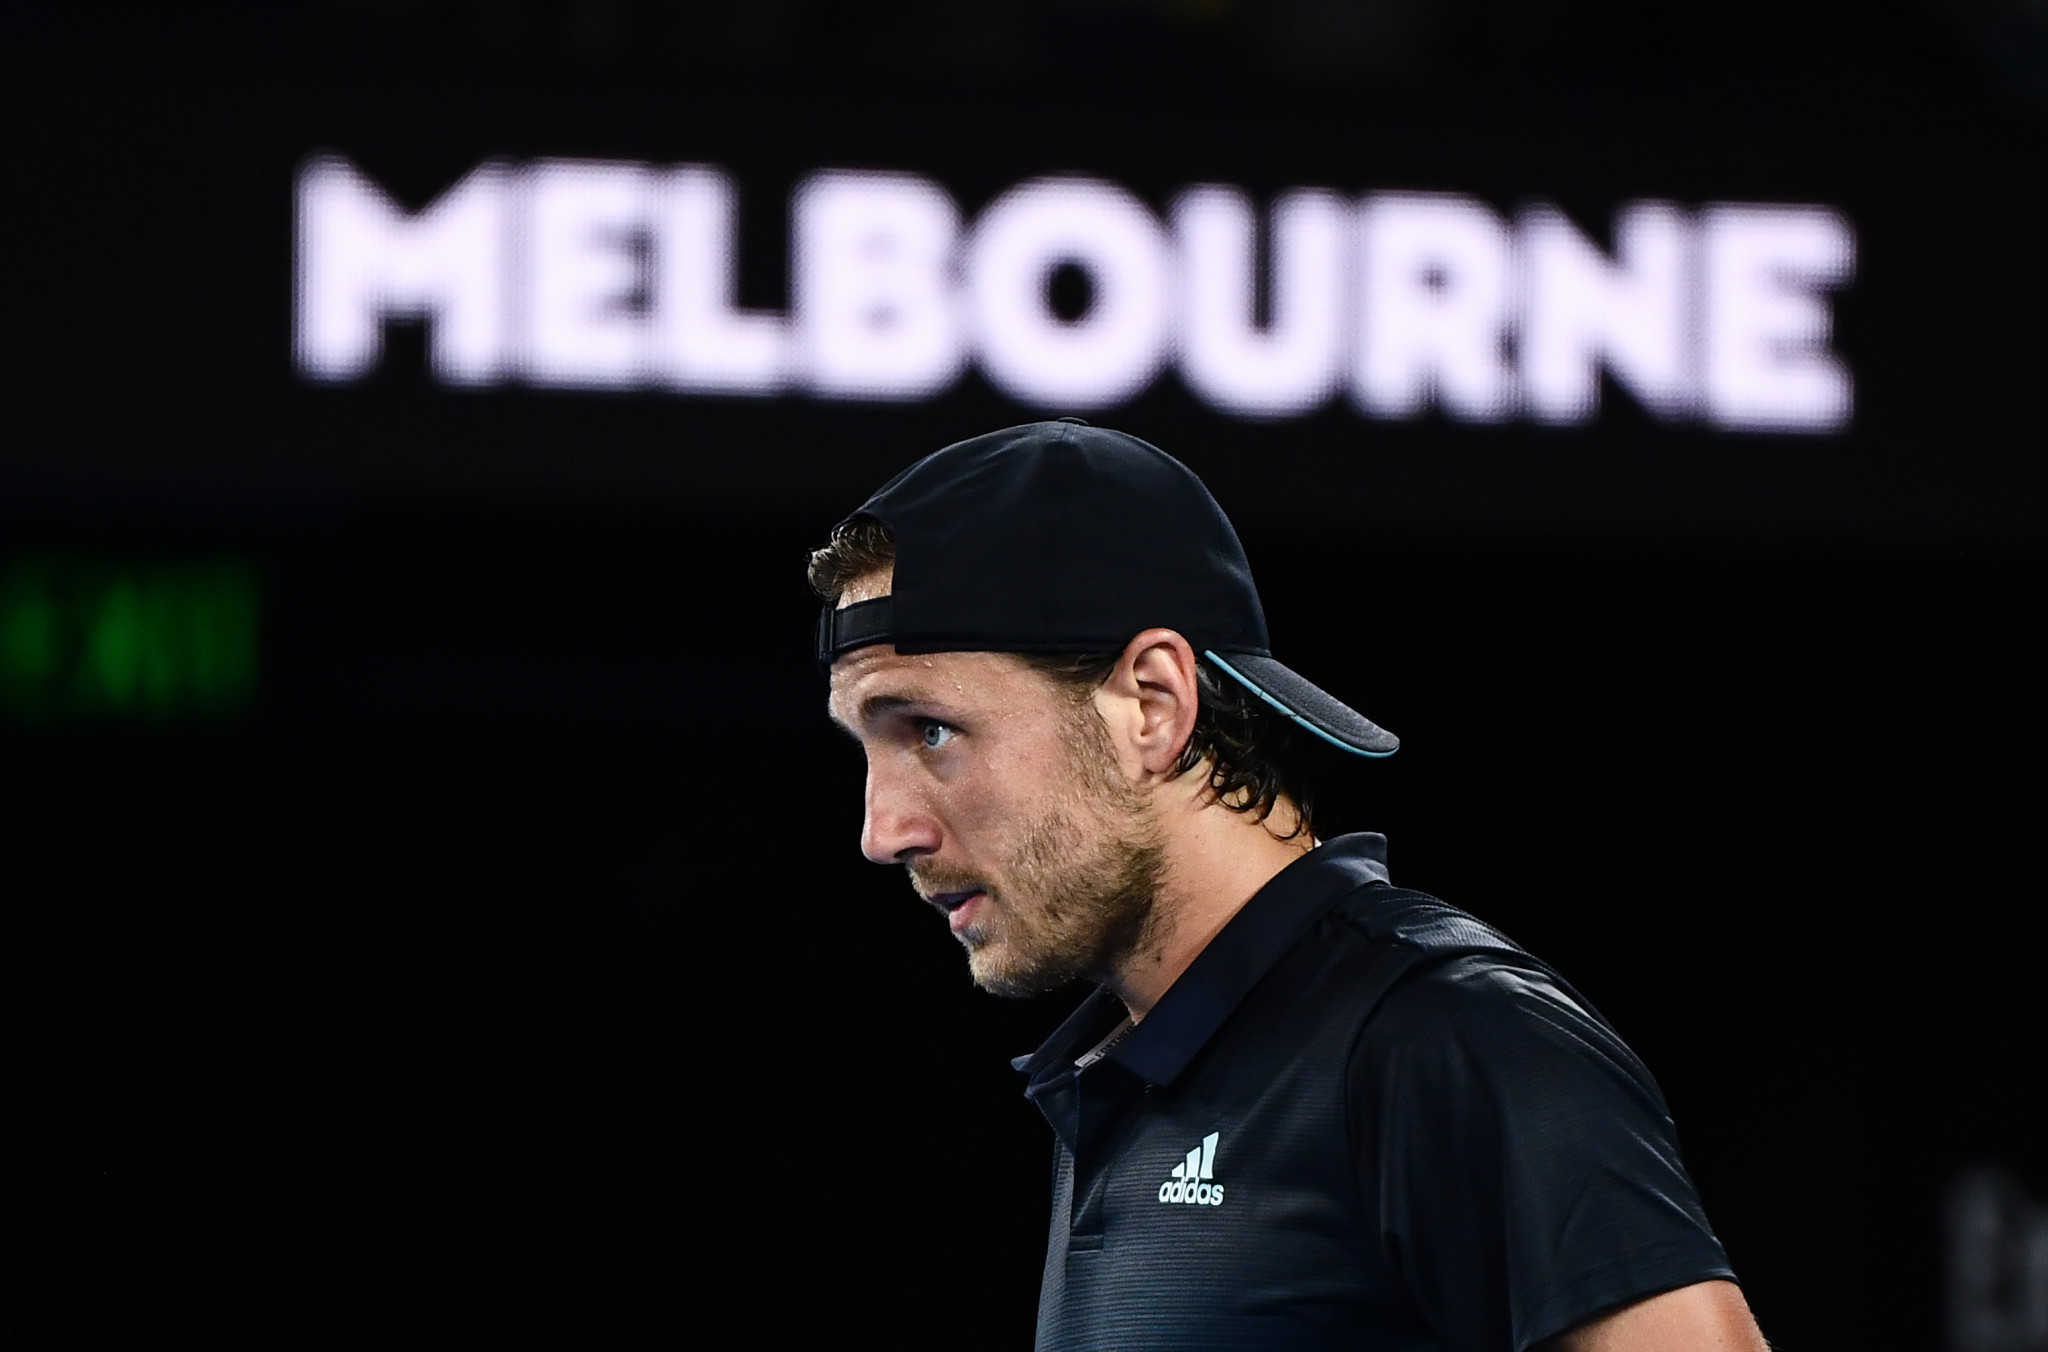 Lucas Pouille was making his first appearance in a Grand Slam semi-final ©Getty Images